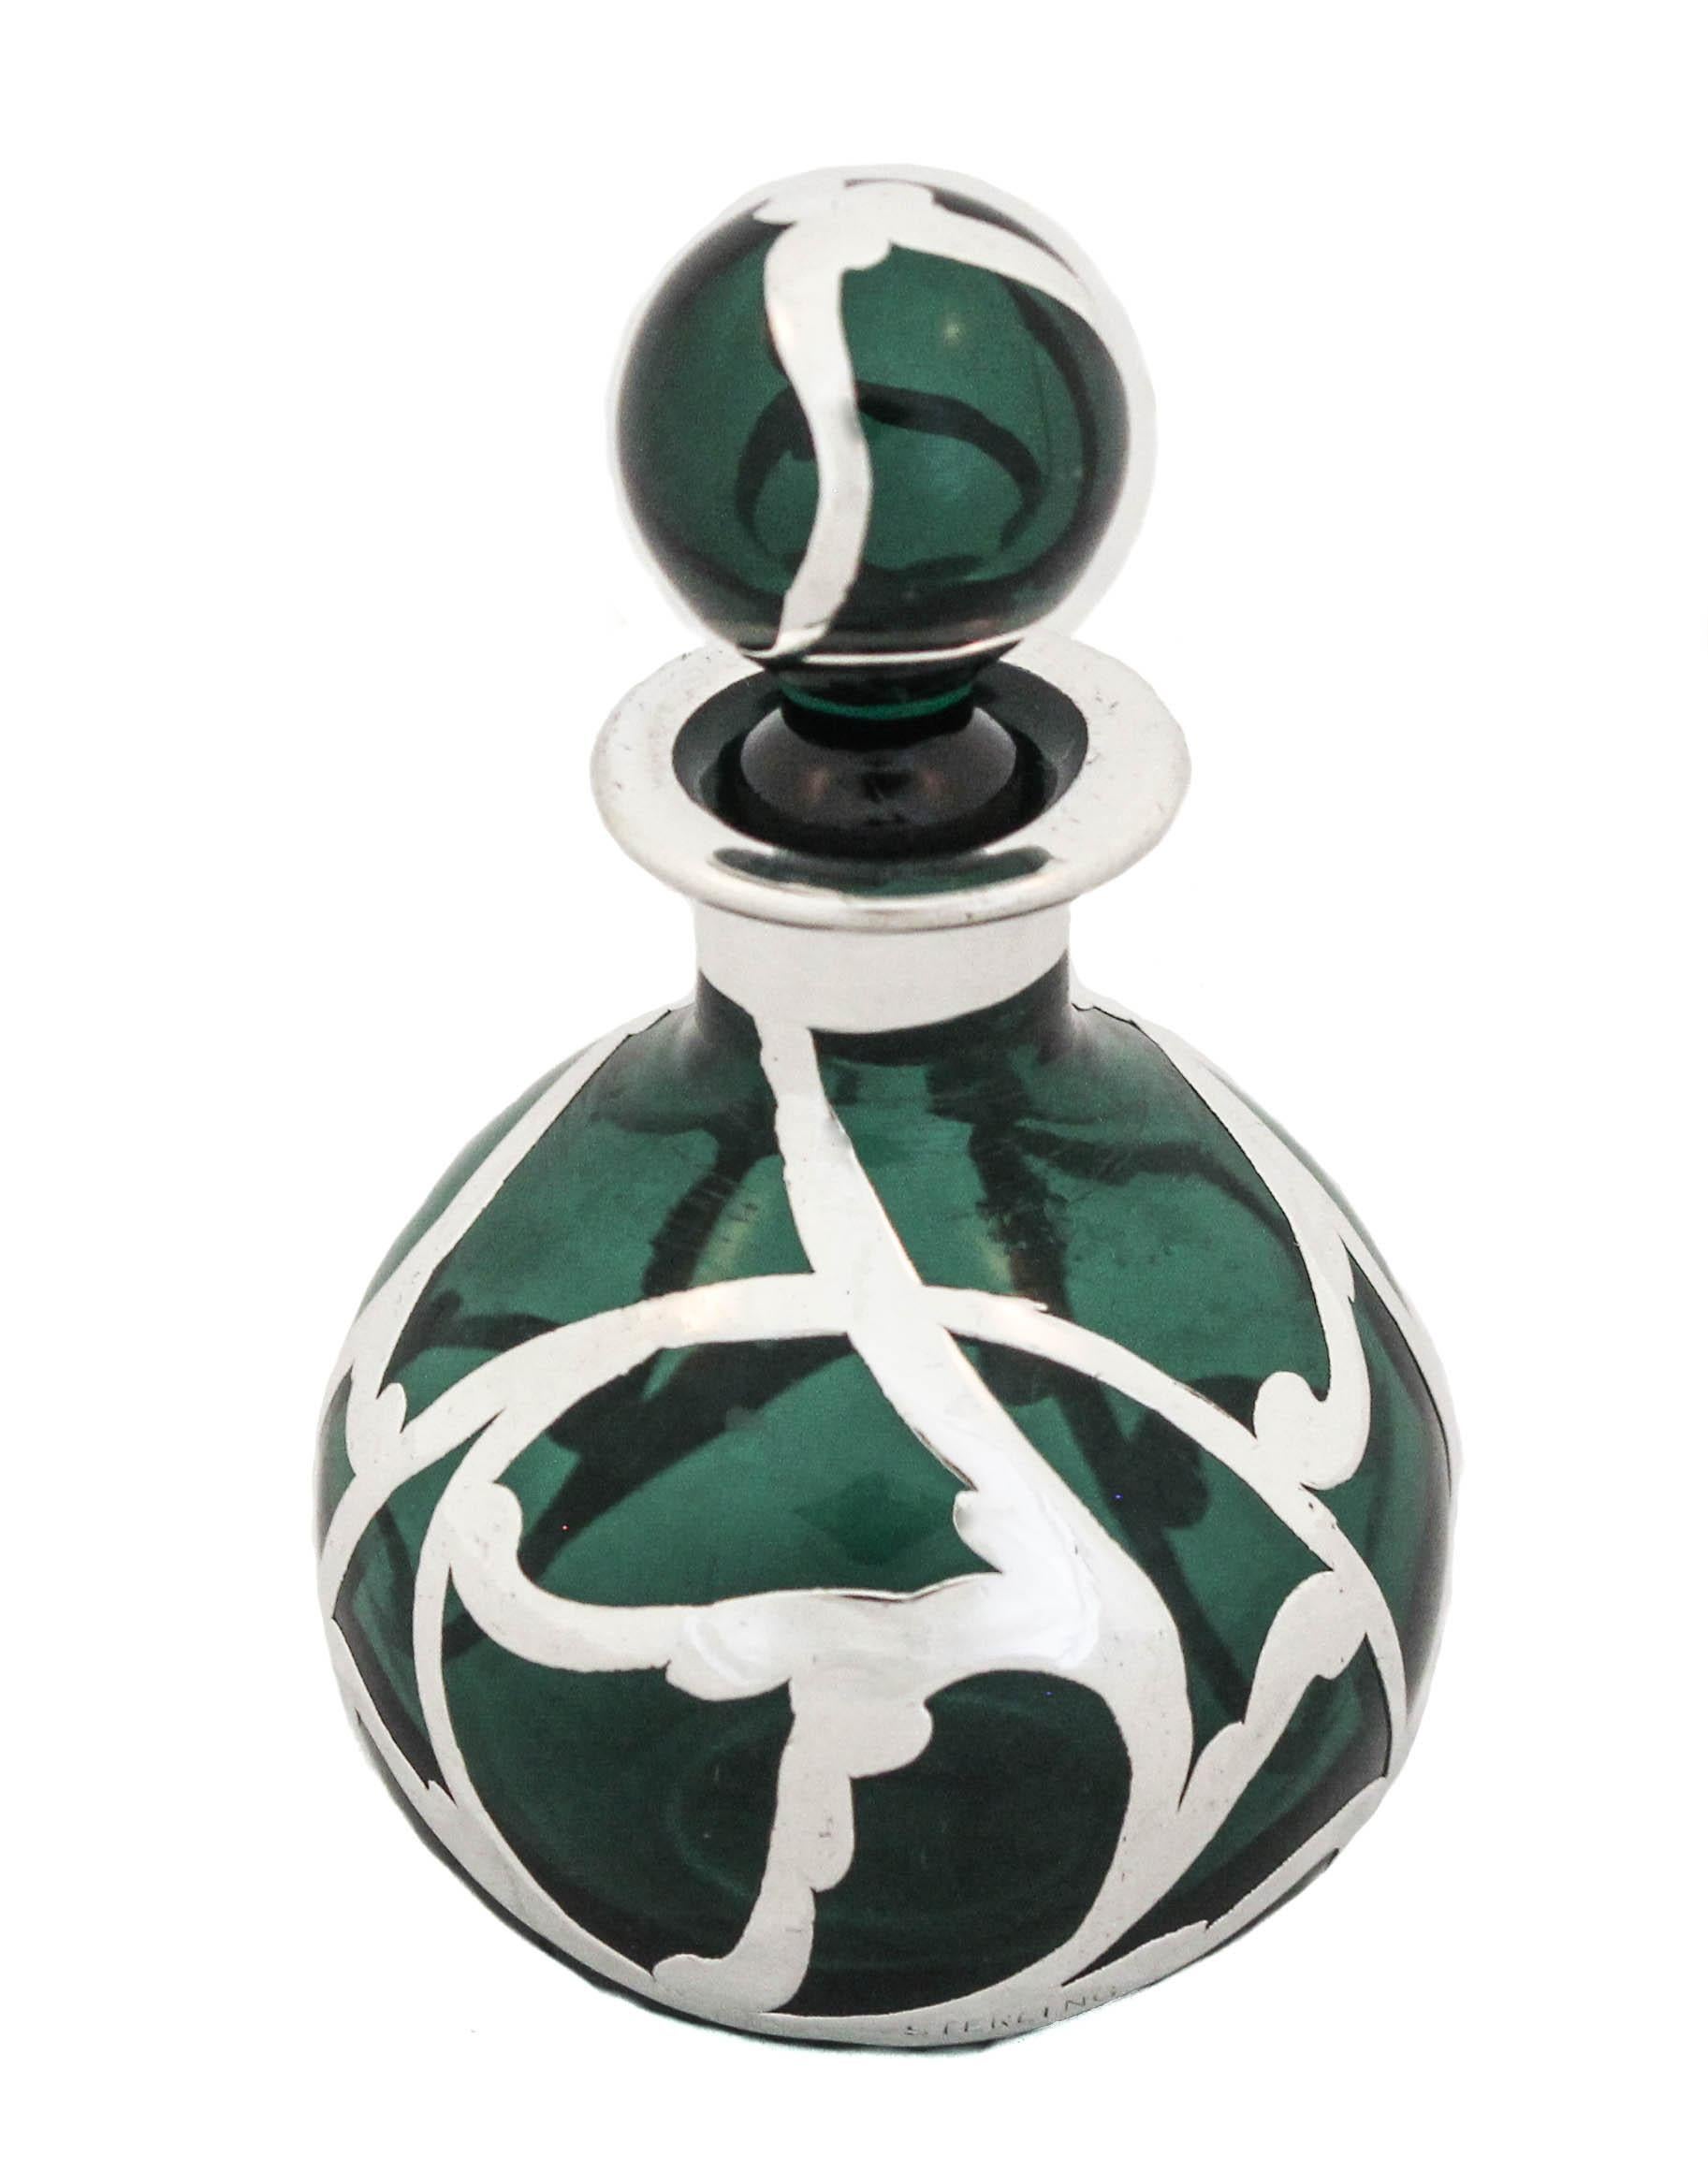 Being offered is a sterling silver and crystal perfume bottle from the Art Nouveau period.  It has a deep-green glass with sterling overlay.  The silver pattern is quintessential Art Nouveau in its’ free-flowing, organic swirls.  The color is so